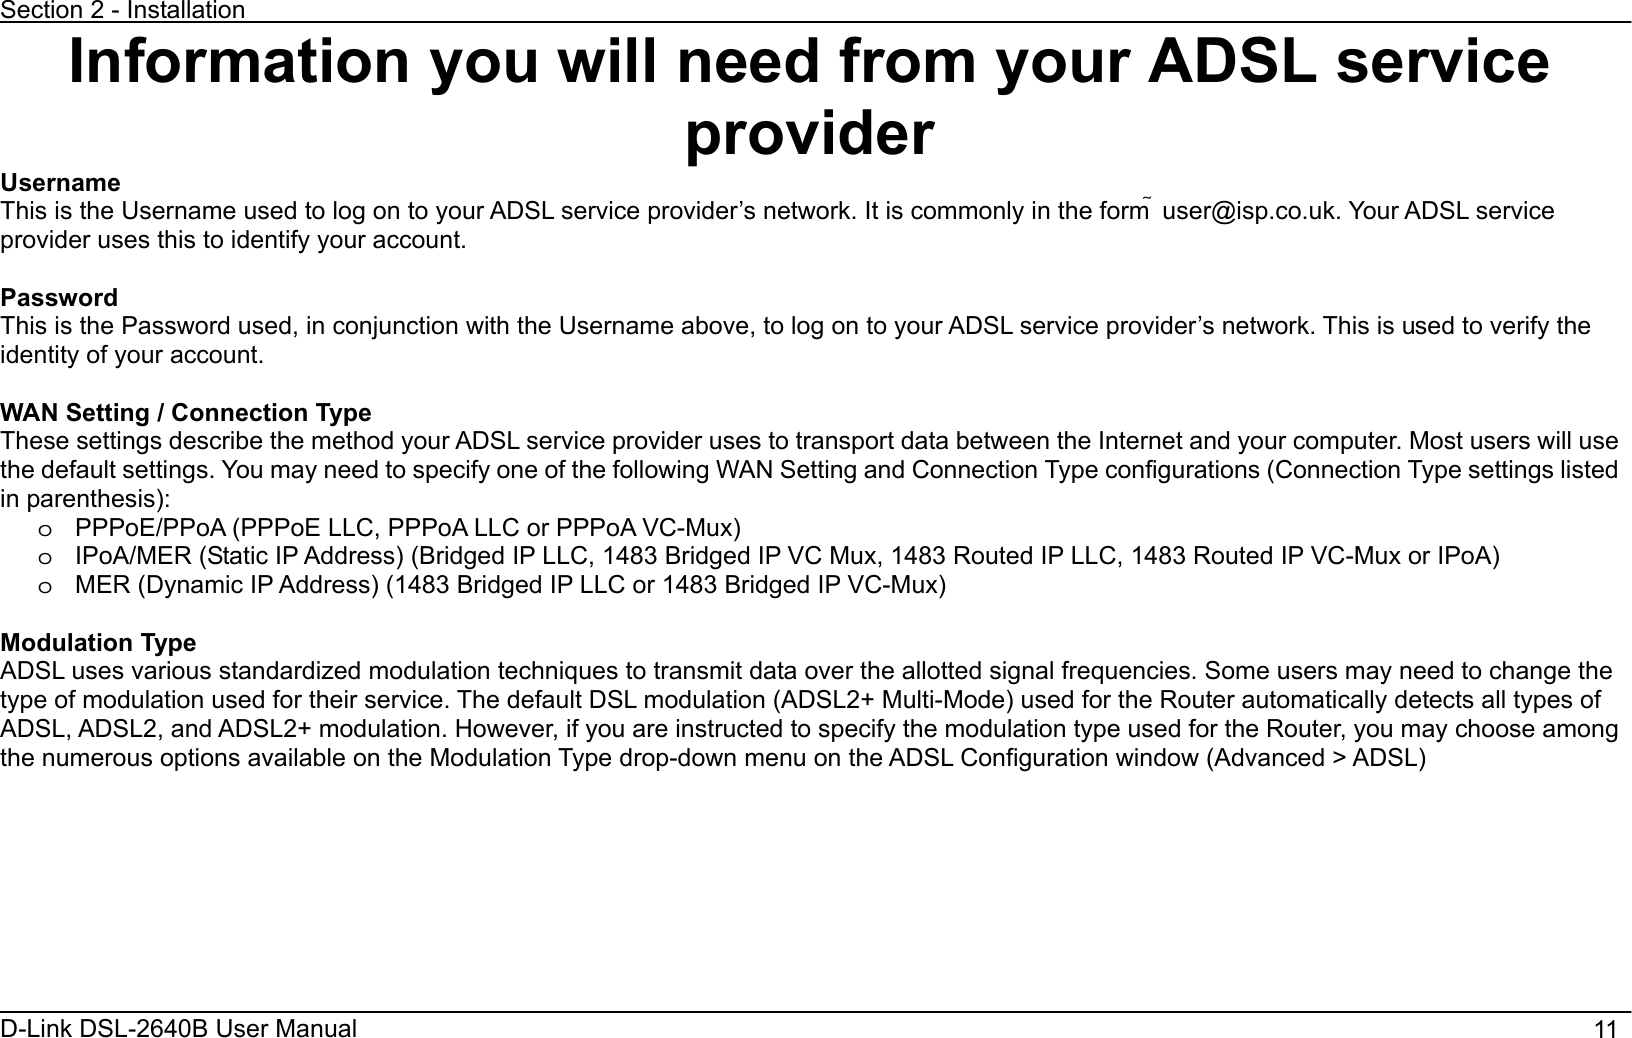 Section 2 - Installation D-Link DSL-2640B User Manual                                       11 Information you will need from your ADSL service providerUsernameThis is the Username used to log on to your ADSL service provider’s network. It is commonly in the form ҟ user@isp.co.uk. Your ADSL service provider uses this to identify your account. Password This is the Password used, in conjunction with the Username above, to log on to your ADSL service provider’s network. This is used to verify the identity of your account. WAN Setting / Connection Type These settings describe the method your ADSL service provider uses to transport data between the Internet and your computer. Most users will use the default settings. You may need to specify one of the following WAN Setting and Connection Type configurations (Connection Type settings listed in parenthesis):   o  PPPoE/PPoA (PPPoE LLC, PPPoA LLC or PPPoA VC-Mux) o  IPoA/MER (Static IP Address) (Bridged IP LLC, 1483 Bridged IP VC Mux, 1483 Routed IP LLC, 1483 Routed IP VC-Mux or IPoA) o  MER (Dynamic IP Address) (1483 Bridged IP LLC or 1483 Bridged IP VC-Mux)     Modulation Type ADSL uses various standardized modulation techniques to transmit data over the allotted signal frequencies. Some users may need to change the type of modulation used for their service. The default DSL modulation (ADSL2+ Multi-Mode) used for the Router automatically detects all types of ADSL, ADSL2, and ADSL2+ modulation. However, if you are instructed to specify the modulation type used for the Router, you may choose among the numerous options available on the Modulation Type drop-down menu on the ADSL Configuration window (Advanced &gt; ADSL) 